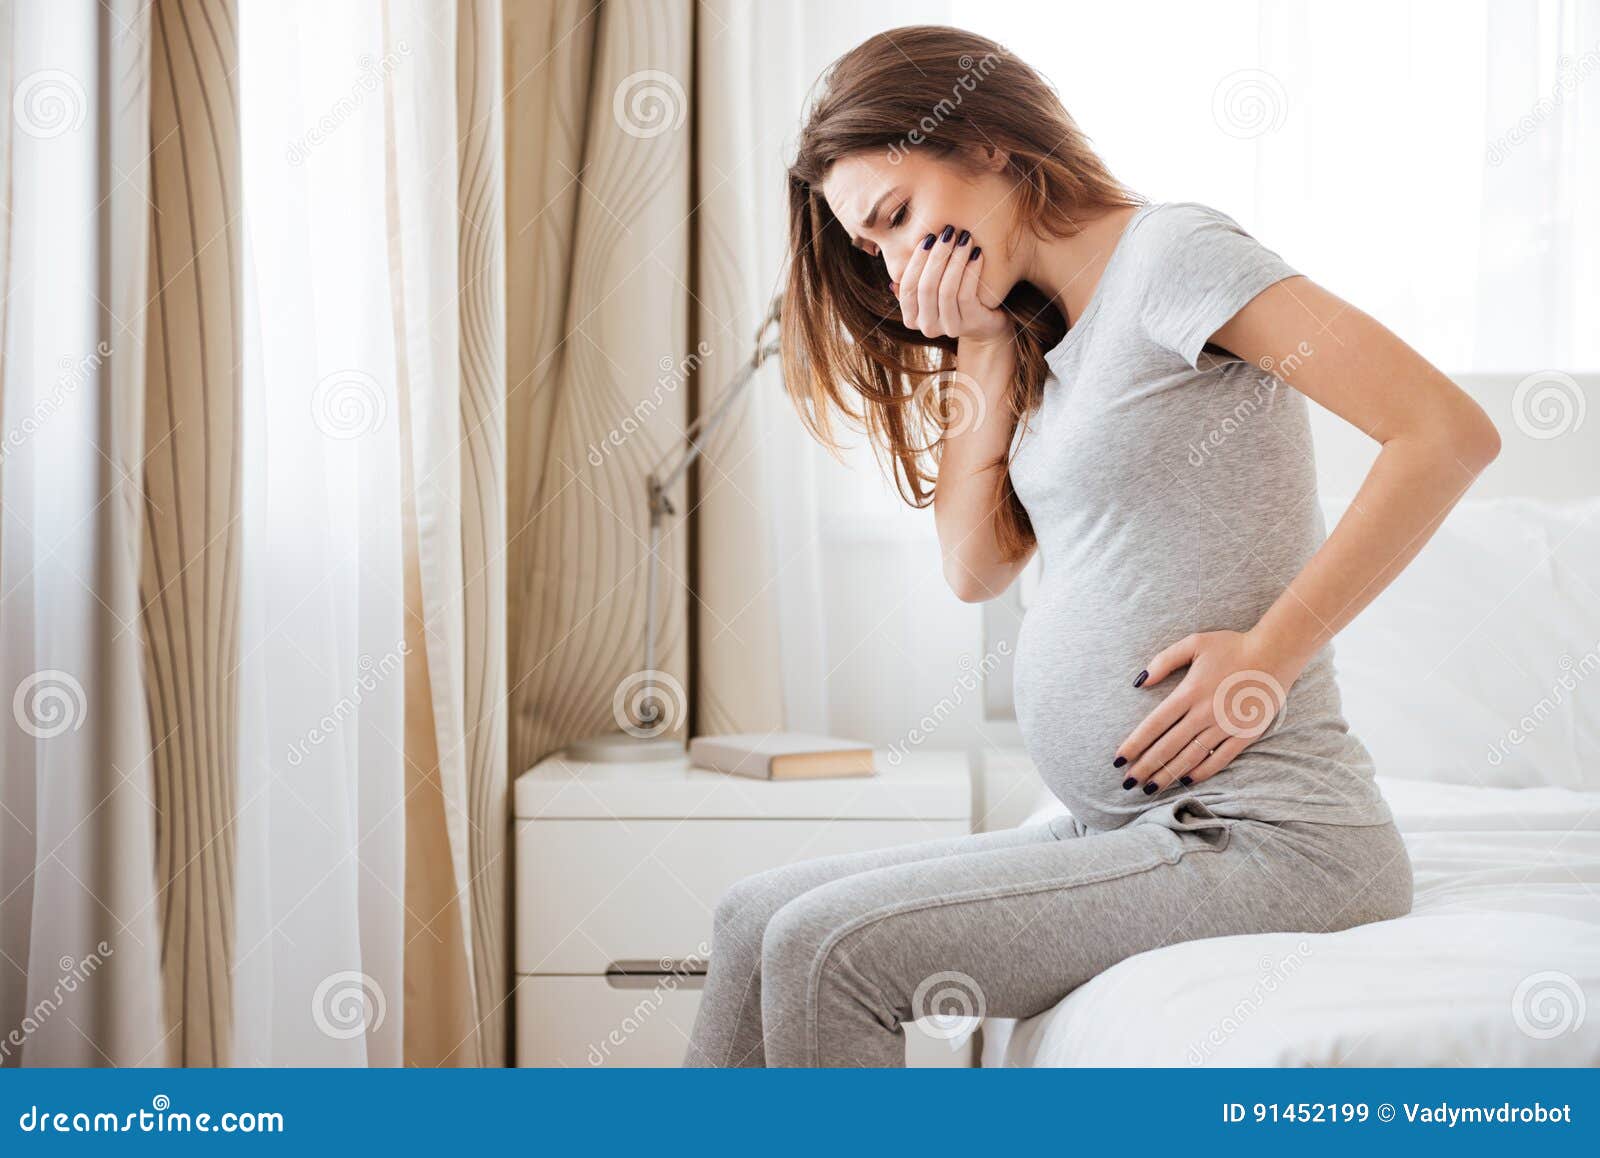 pregnant young woman sitting on bed and feeling sick